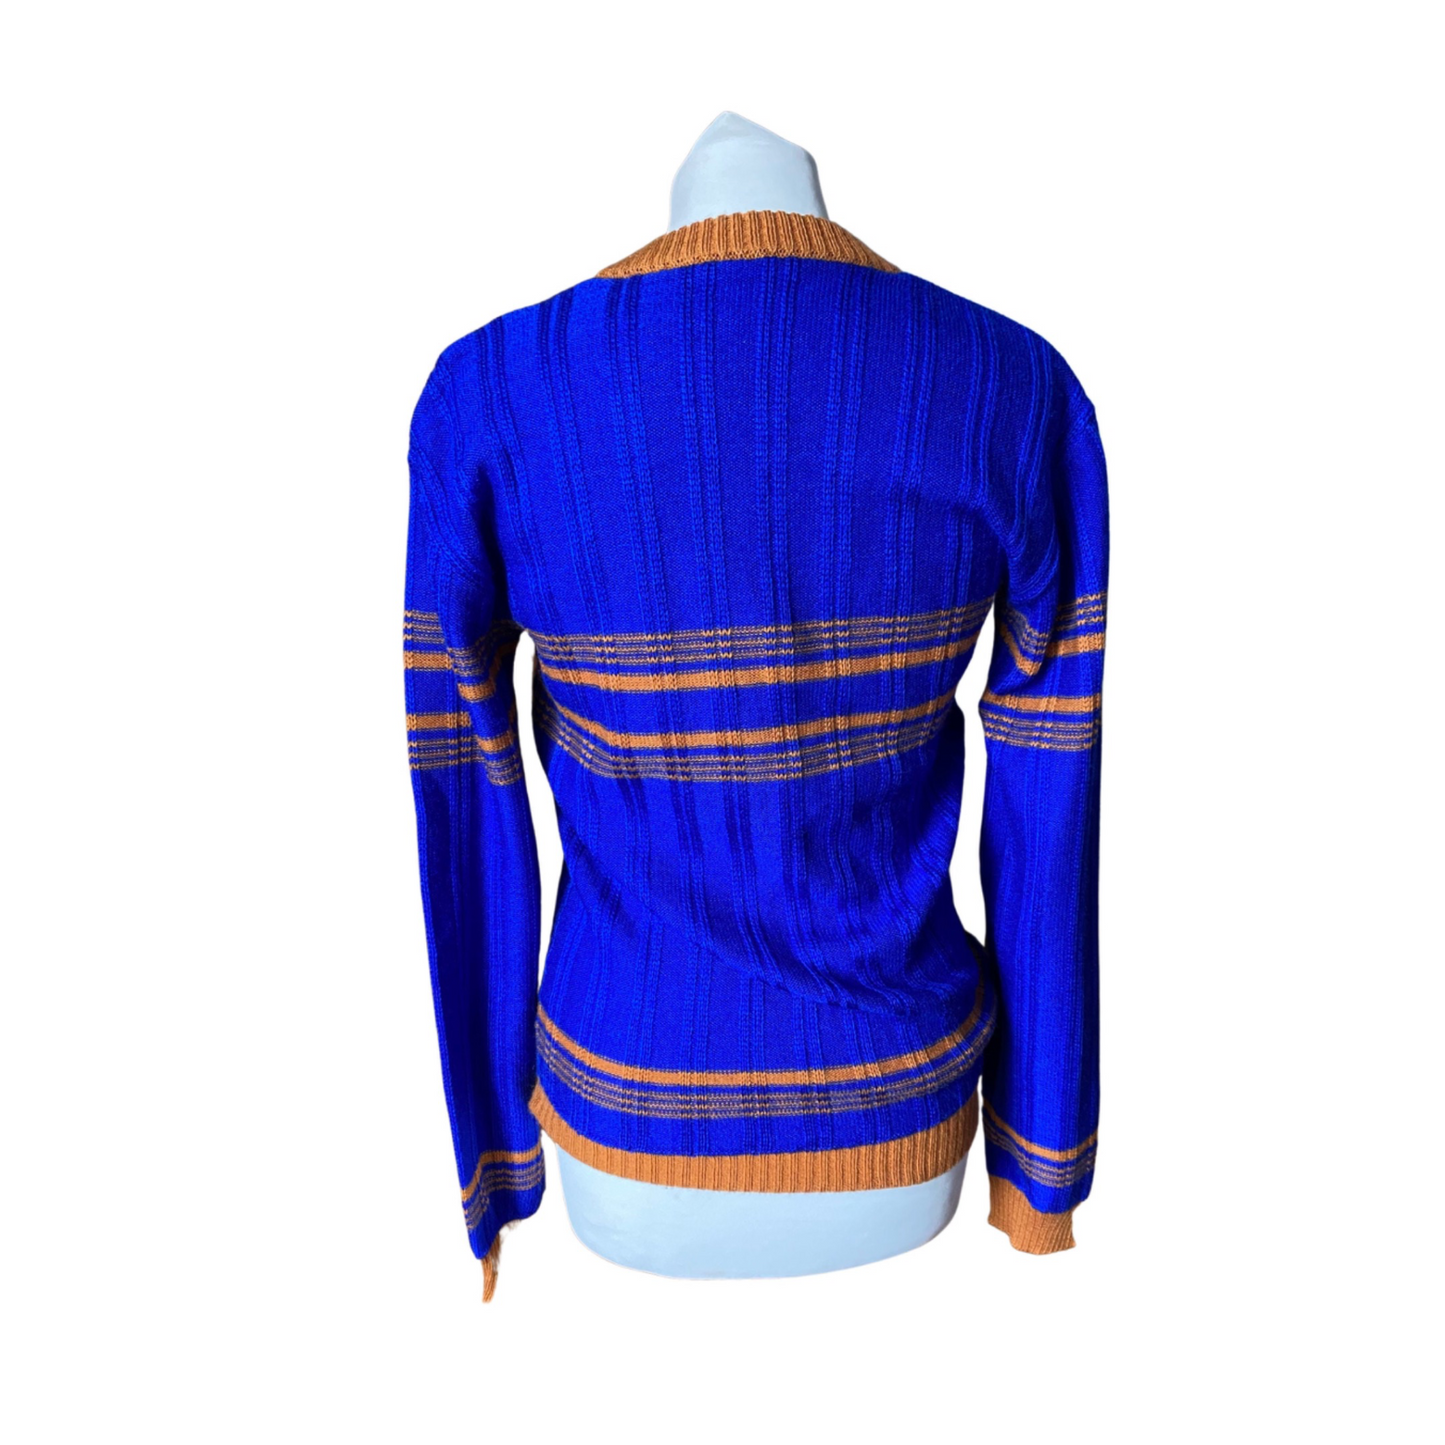 Comfortable and stylish blue and brown  v neck vintage jumper - a wardrobe staple